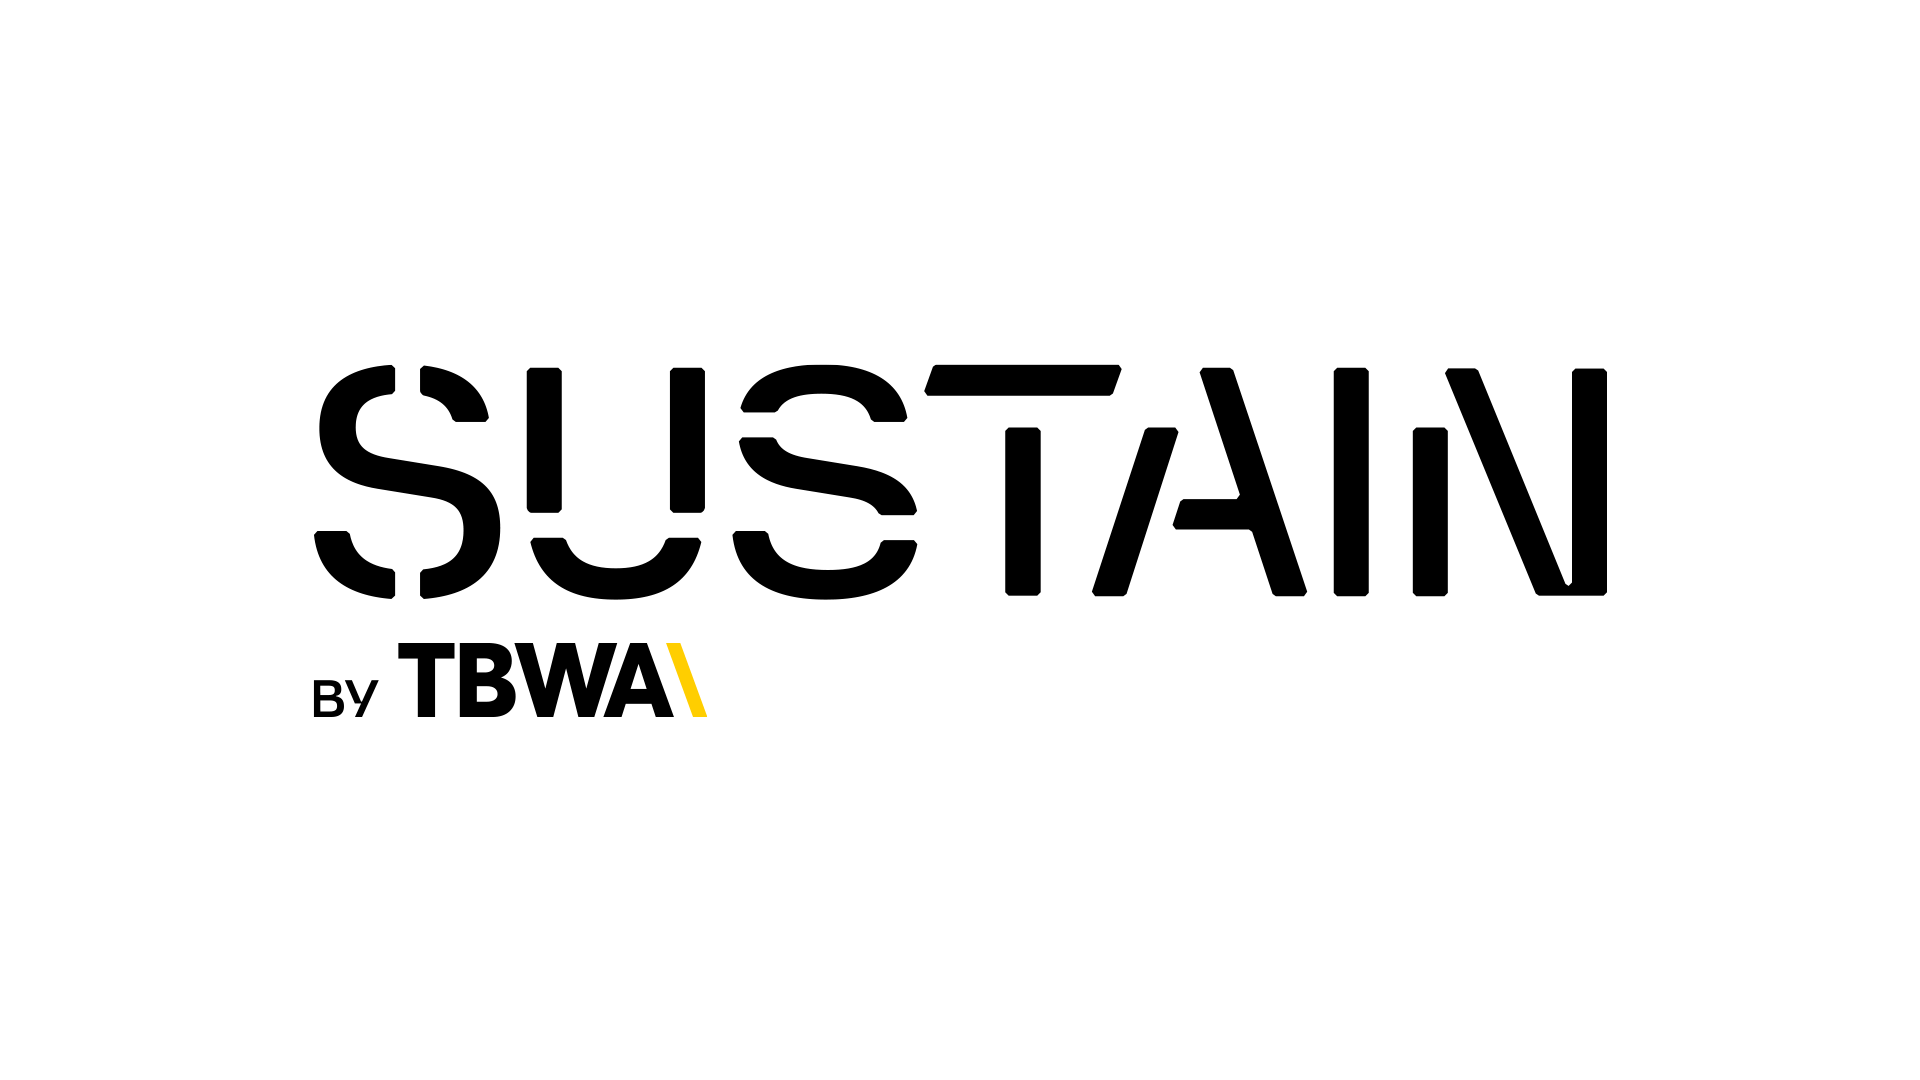 Sustain by TBWA logo